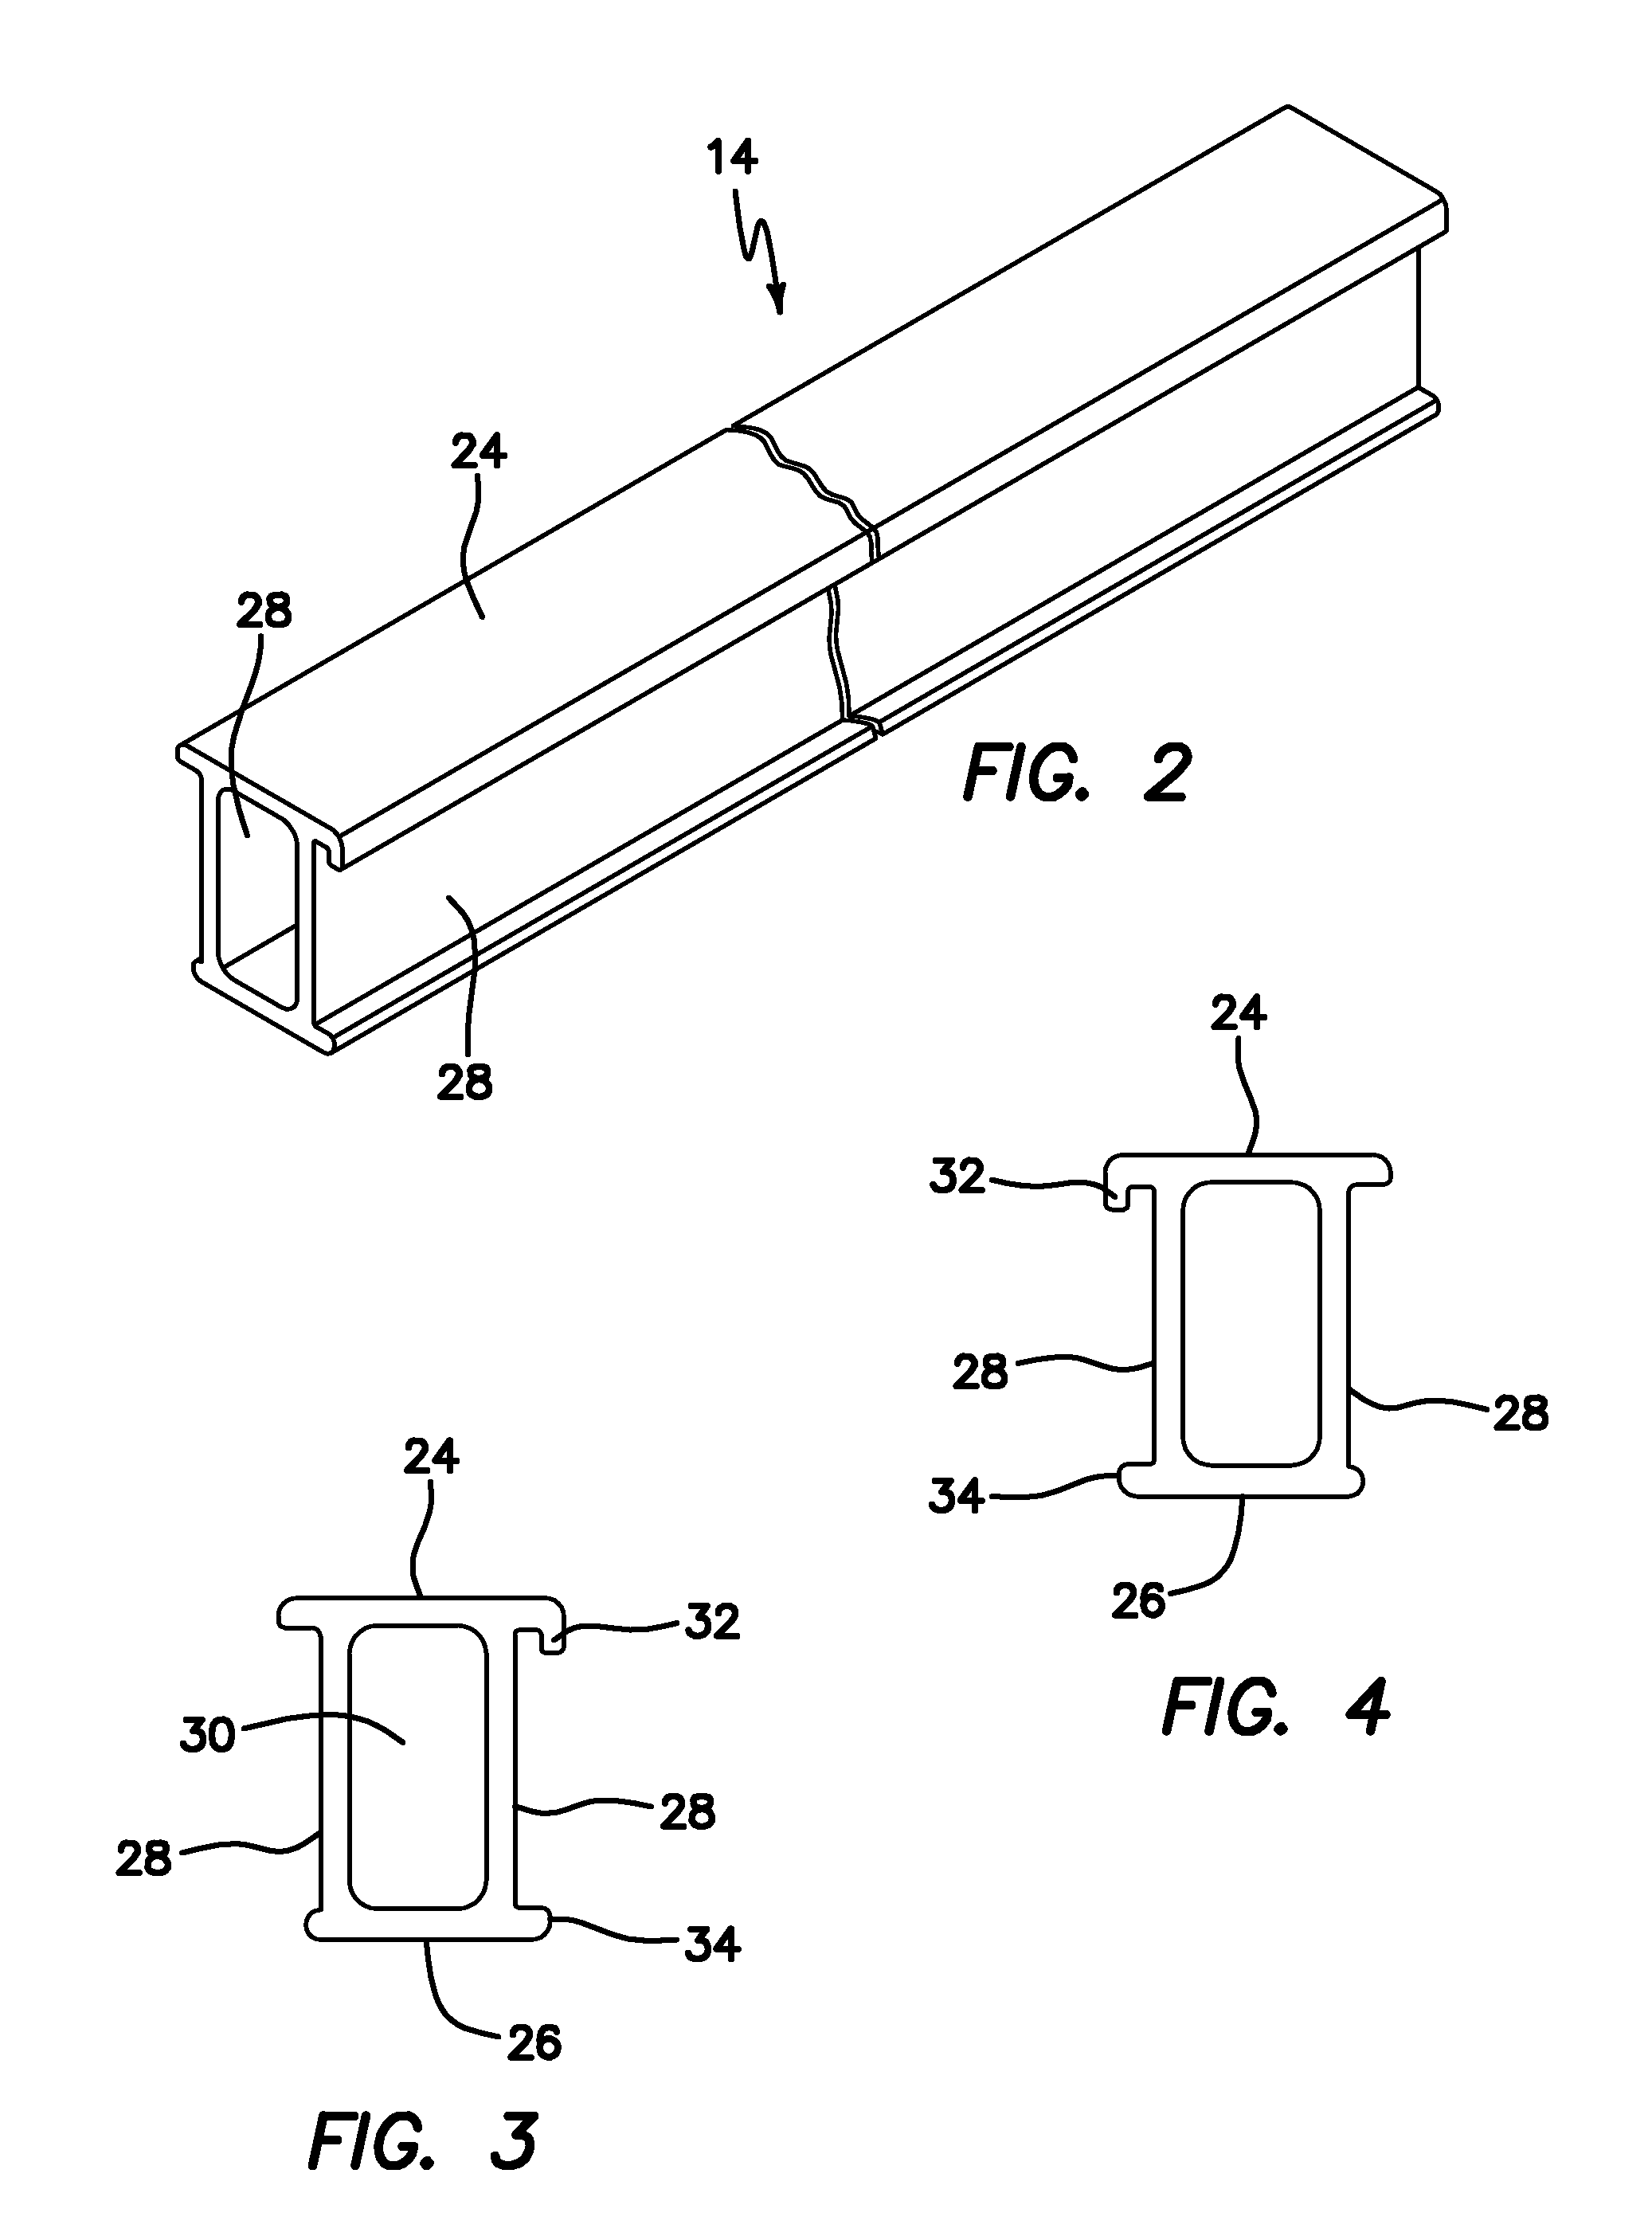 Pultruded scalable shelving system